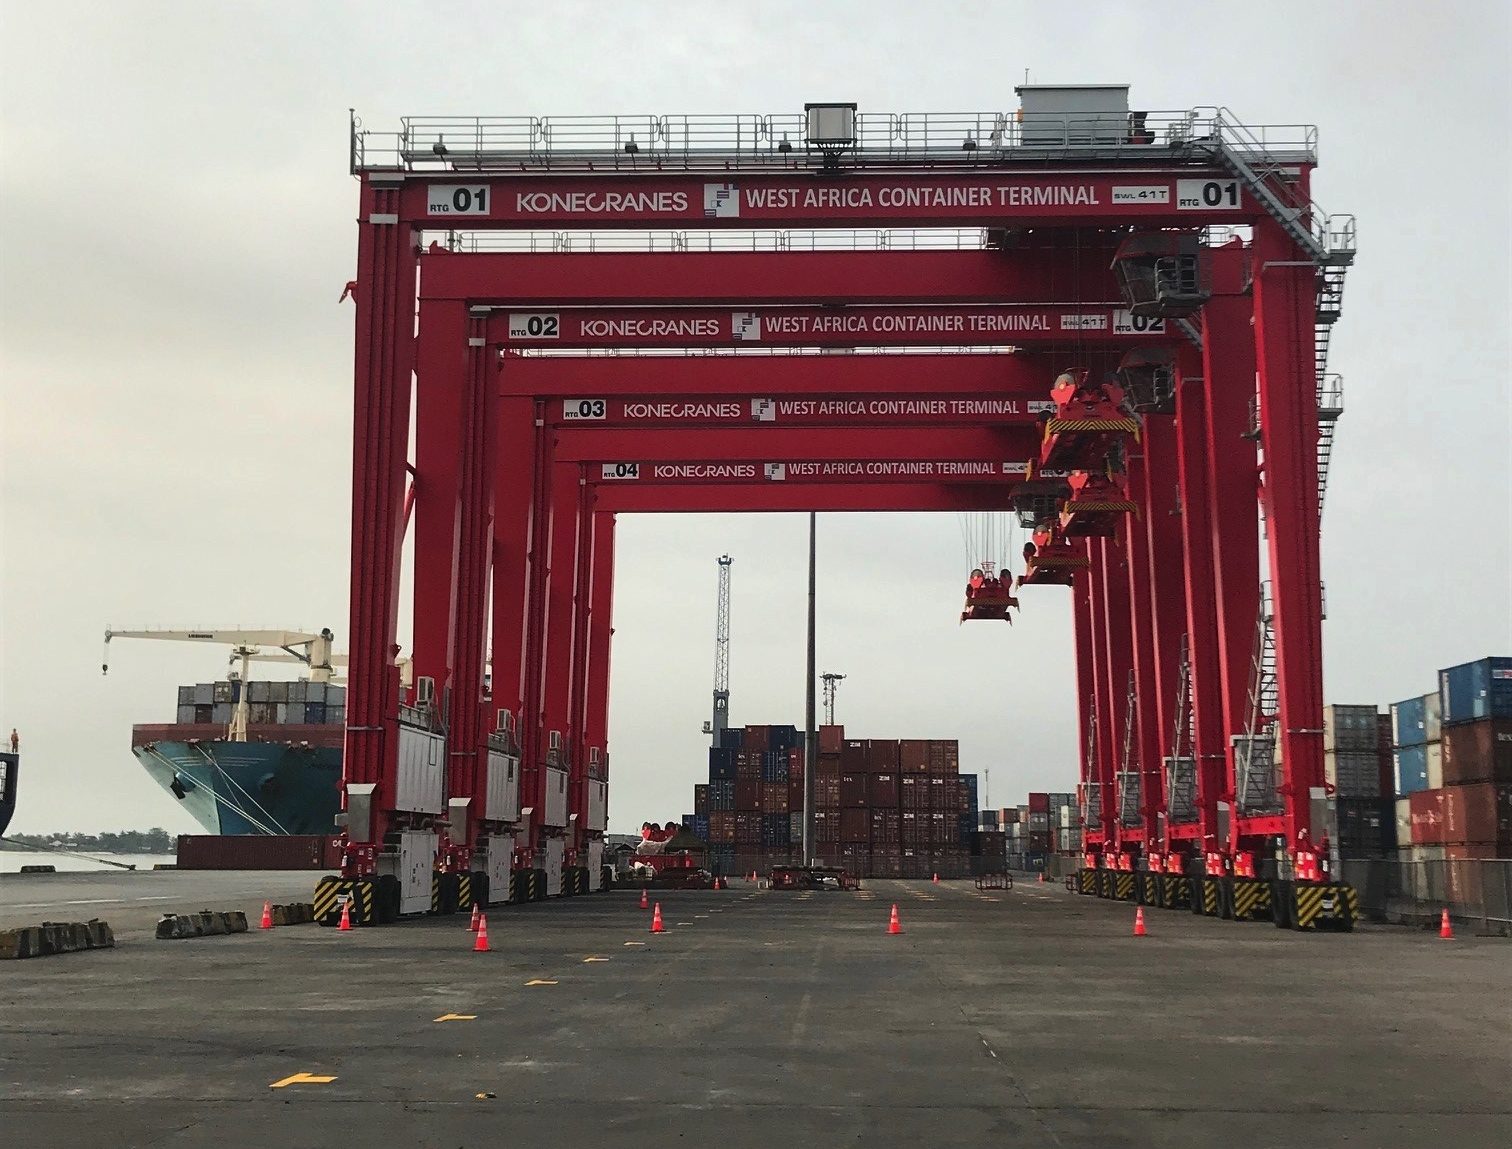 WACT acquires 15 new Rubber Tyred Gantry cranes